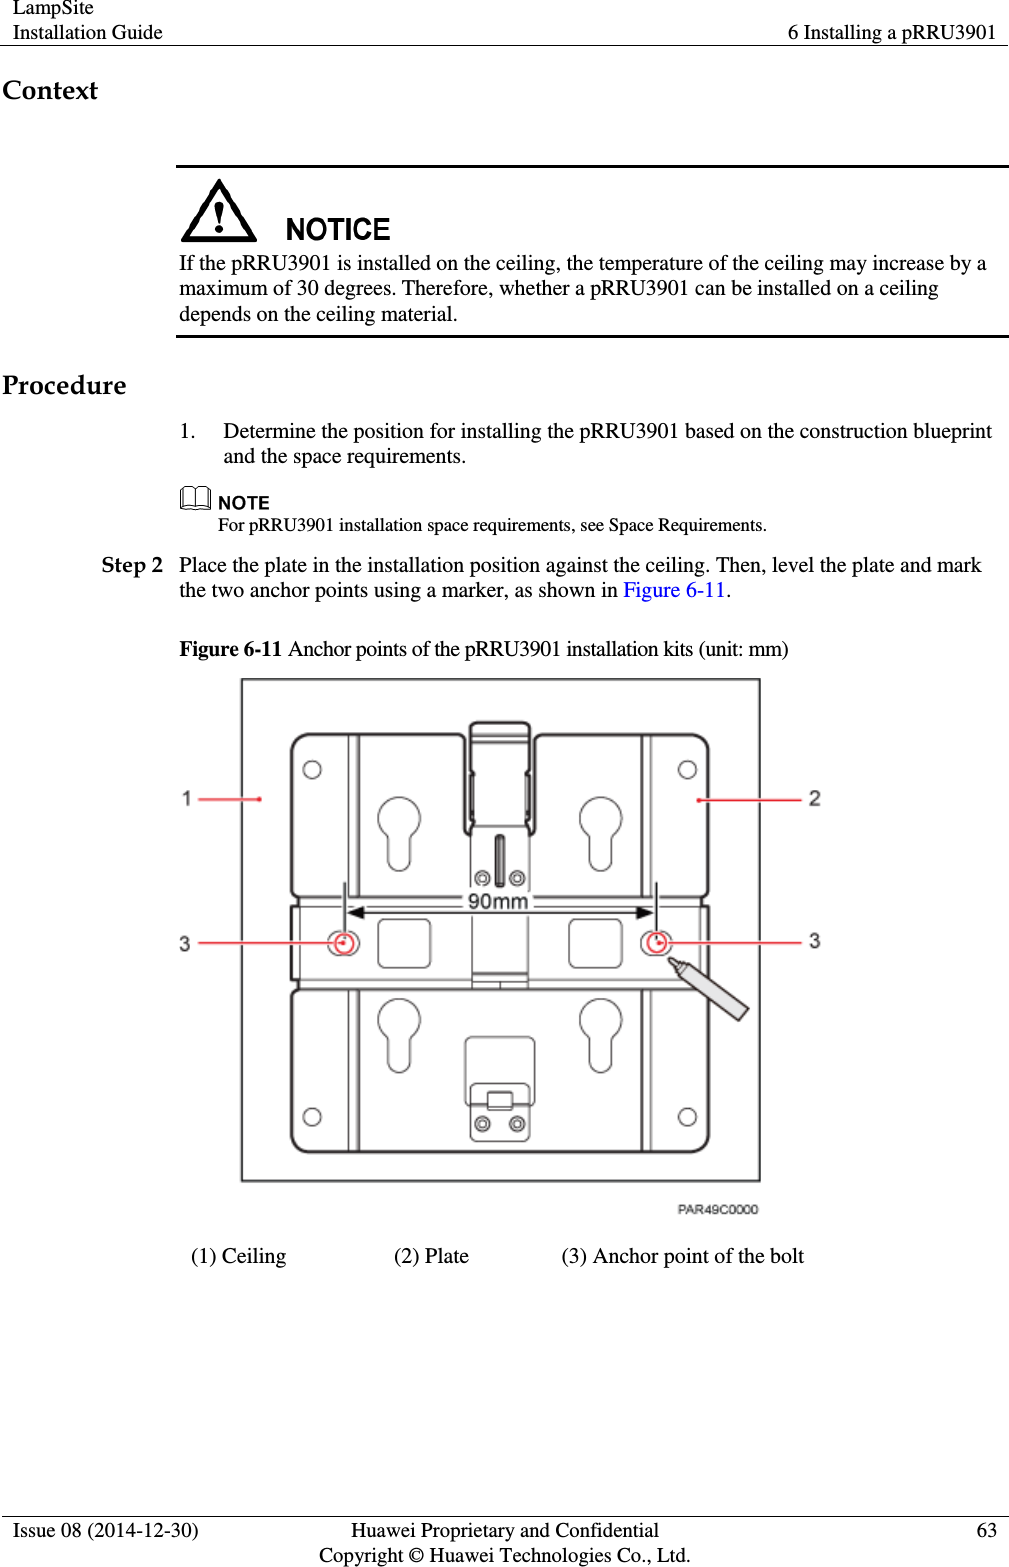 LampSite Installation Guide 6 Installing a pRRU3901  Issue 08 (2014-12-30) Huawei Proprietary and Confidential                                     Copyright © Huawei Technologies Co., Ltd. 63  Context   If the pRRU3901 is installed on the ceiling, the temperature of the ceiling may increase by a maximum of 30 degrees. Therefore, whether a pRRU3901 can be installed on a ceiling depends on the ceiling material. Procedure 1. Determine the position for installing the pRRU3901 based on the construction blueprint and the space requirements.  For pRRU3901 installation space requirements, see Space Requirements. Step 2 Place the plate in the installation position against the ceiling. Then, level the plate and mark the two anchor points using a marker, as shown in Figure 6-11. Figure 6-11 Anchor points of the pRRU3901 installation kits (unit: mm)  (1) Ceiling (2) Plate (3) Anchor point of the bolt  